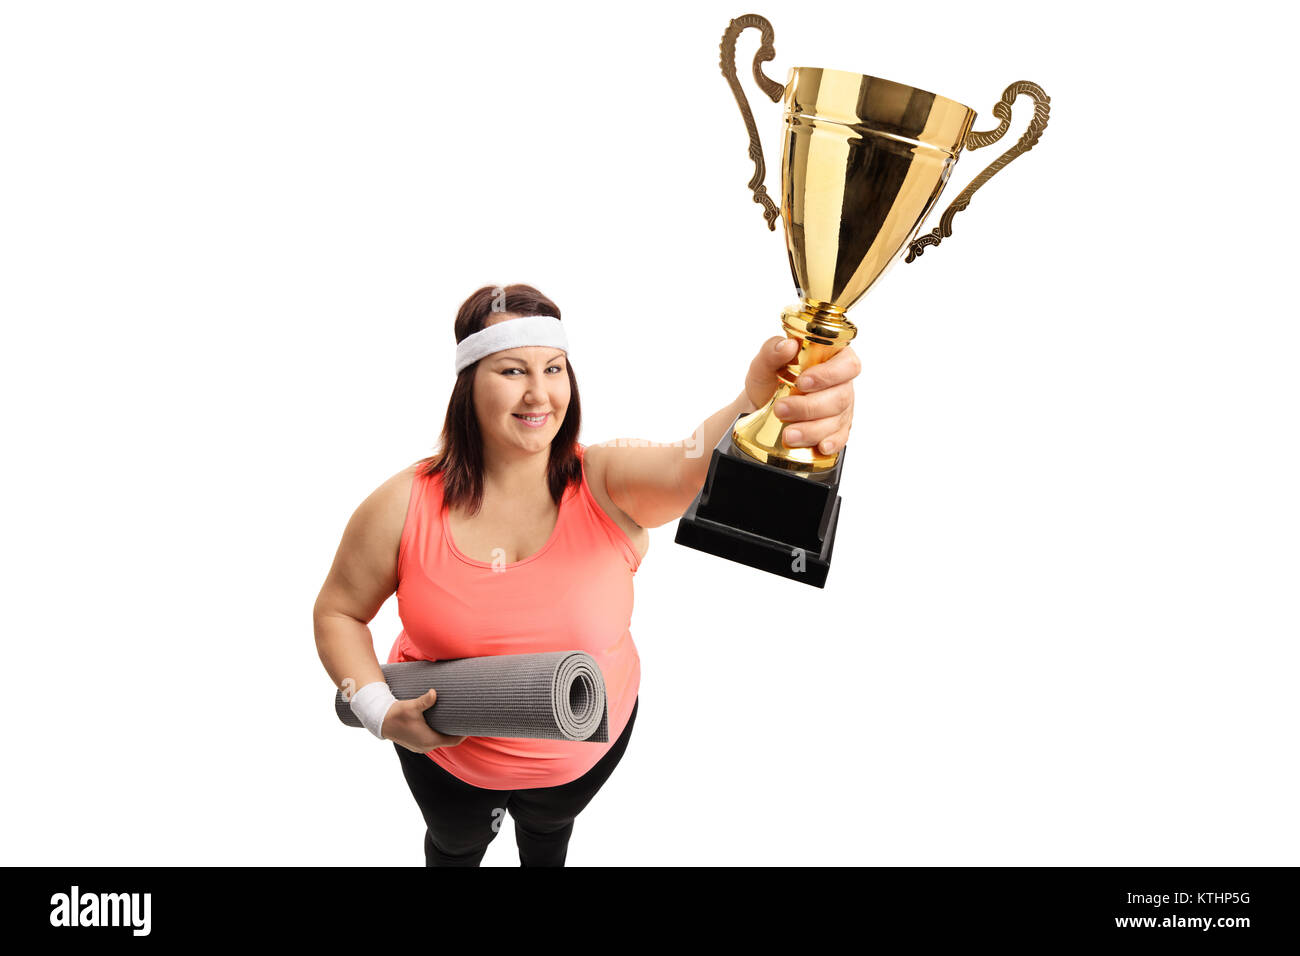 Overweight woman with an exercise mat and a golden trophy isolated on white background Stock Photo